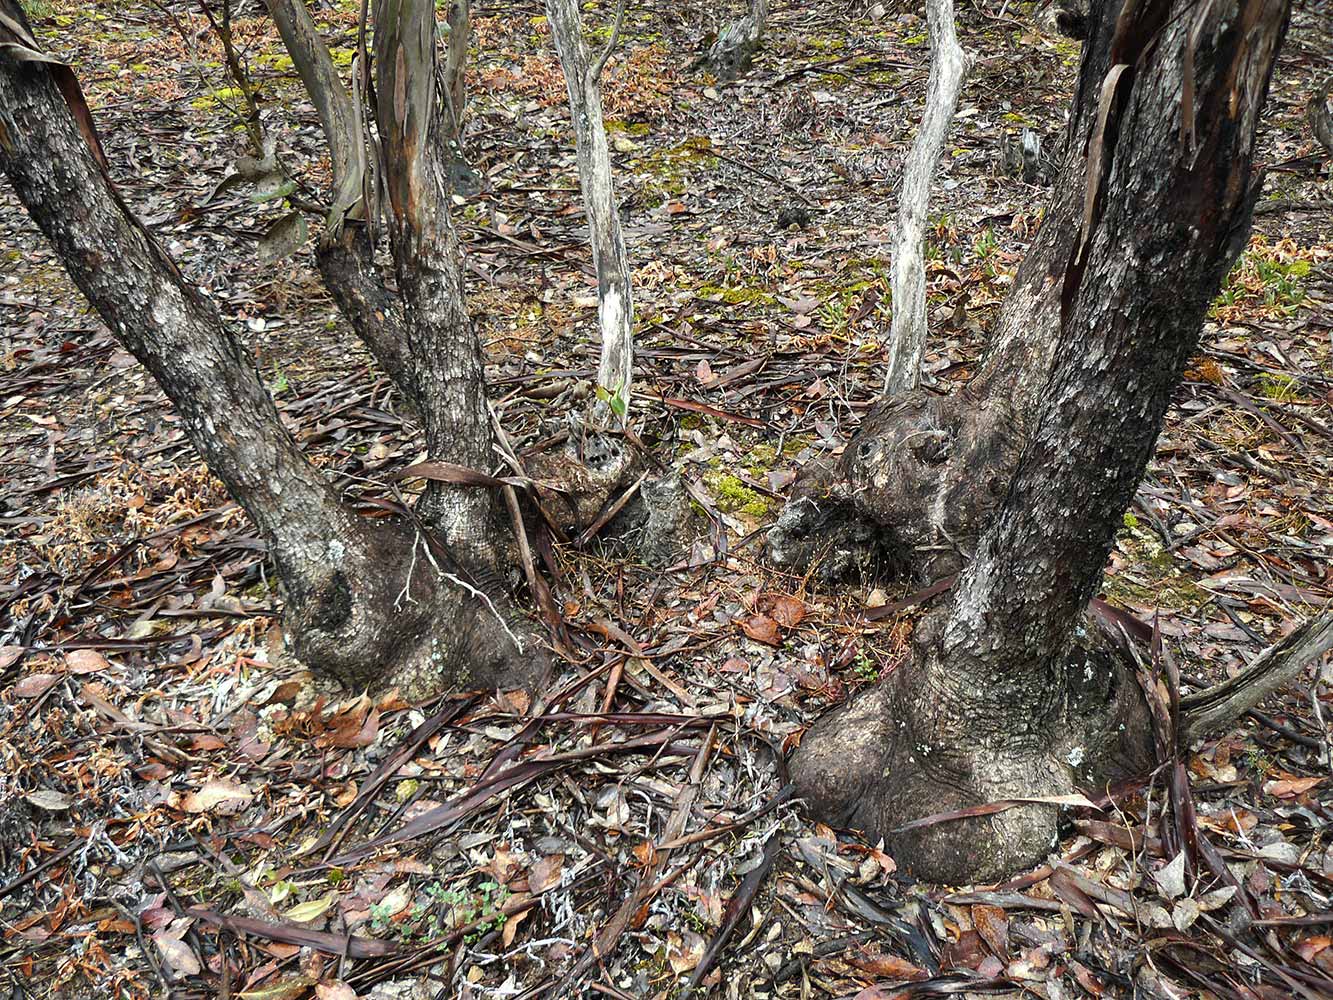 Trees with bulges (lignotubers) at the base of their trunks